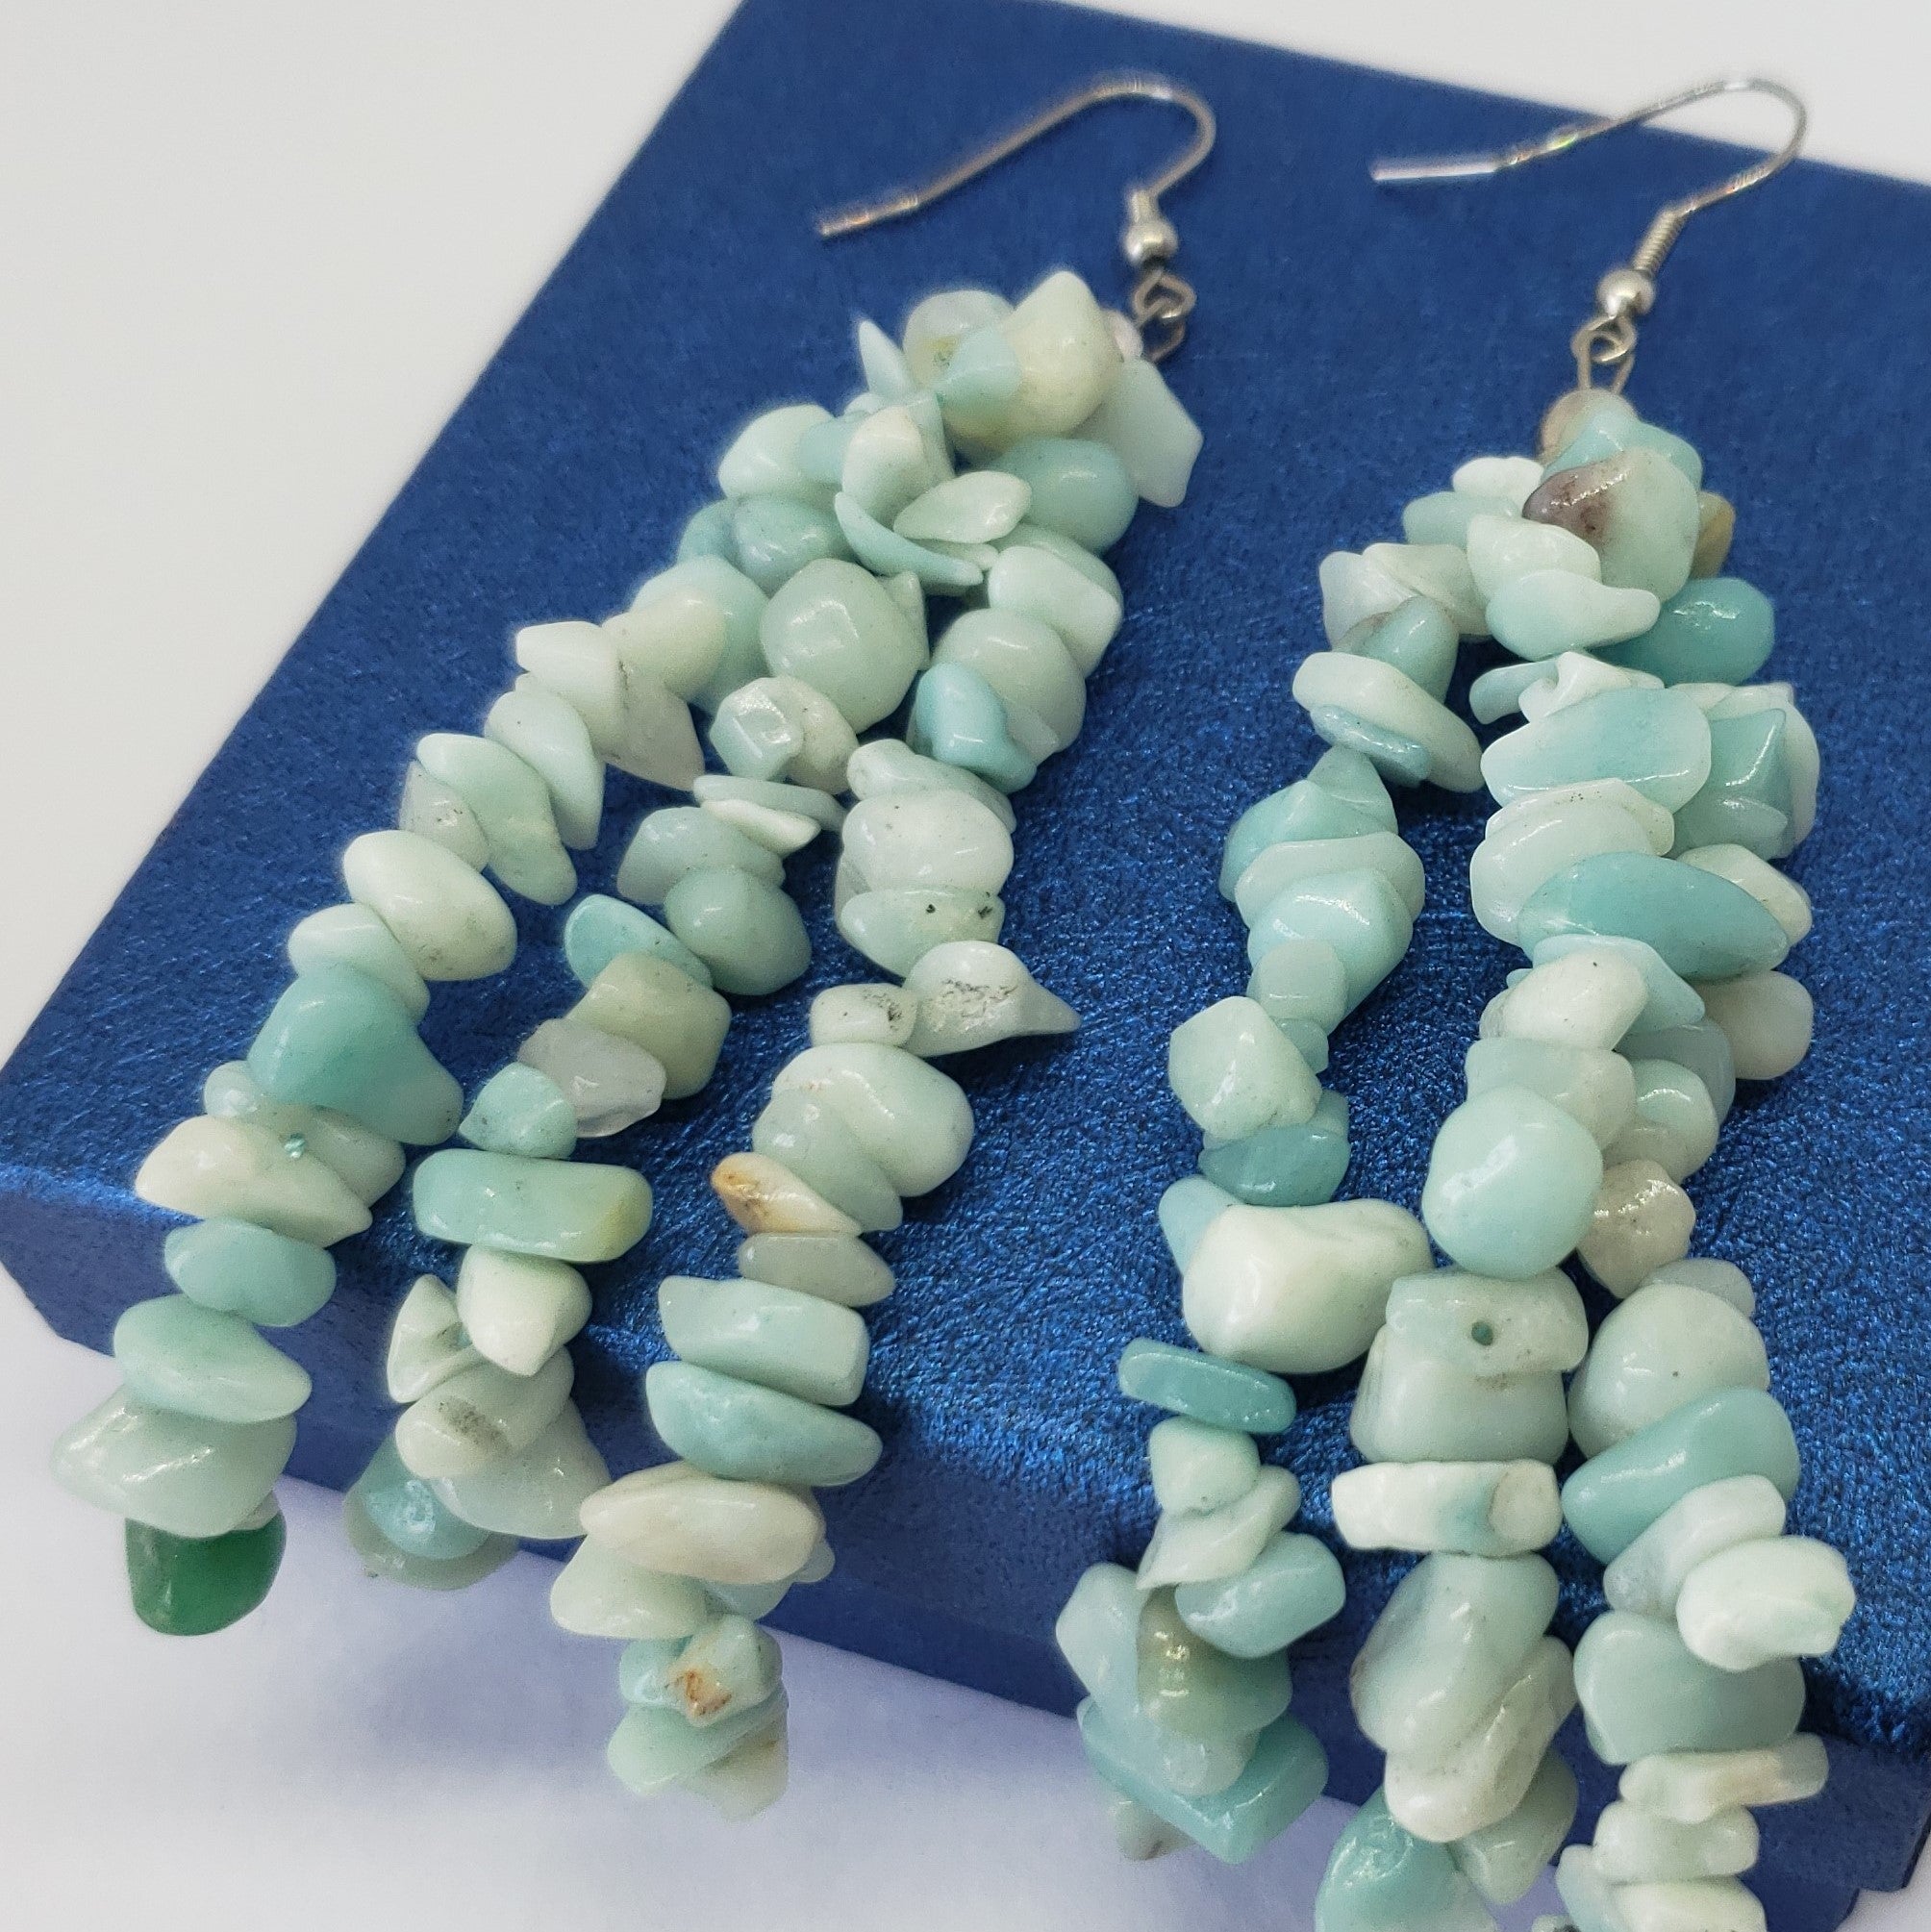 Russian Amazonite Polished Chip Beads Triple Strand Earrings in Stainless Steel - Houzz of DVA Boutique